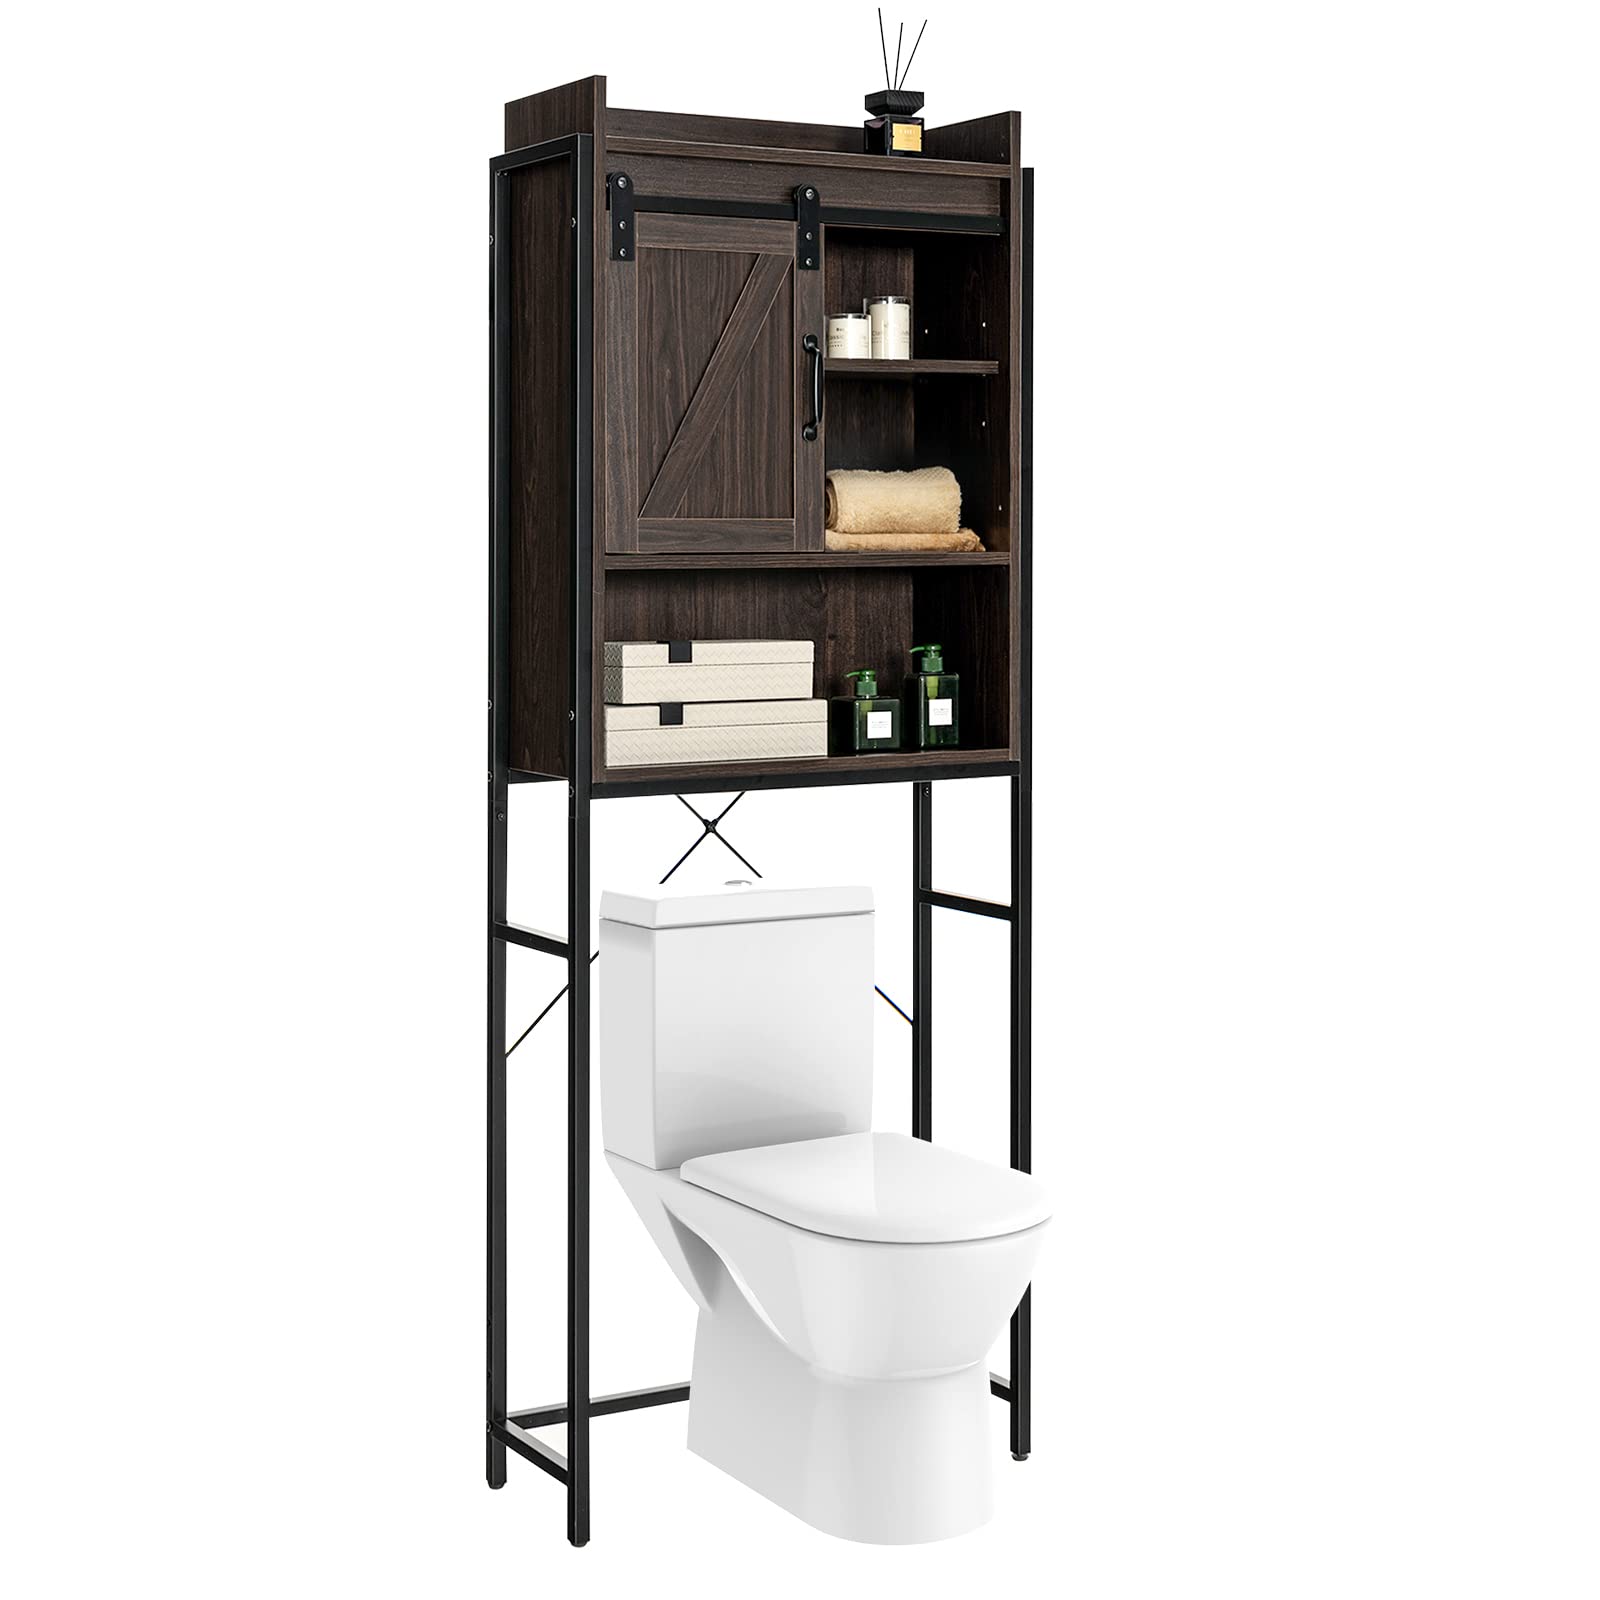 Over-The-Toilet Storage Cabinet - Tangkula